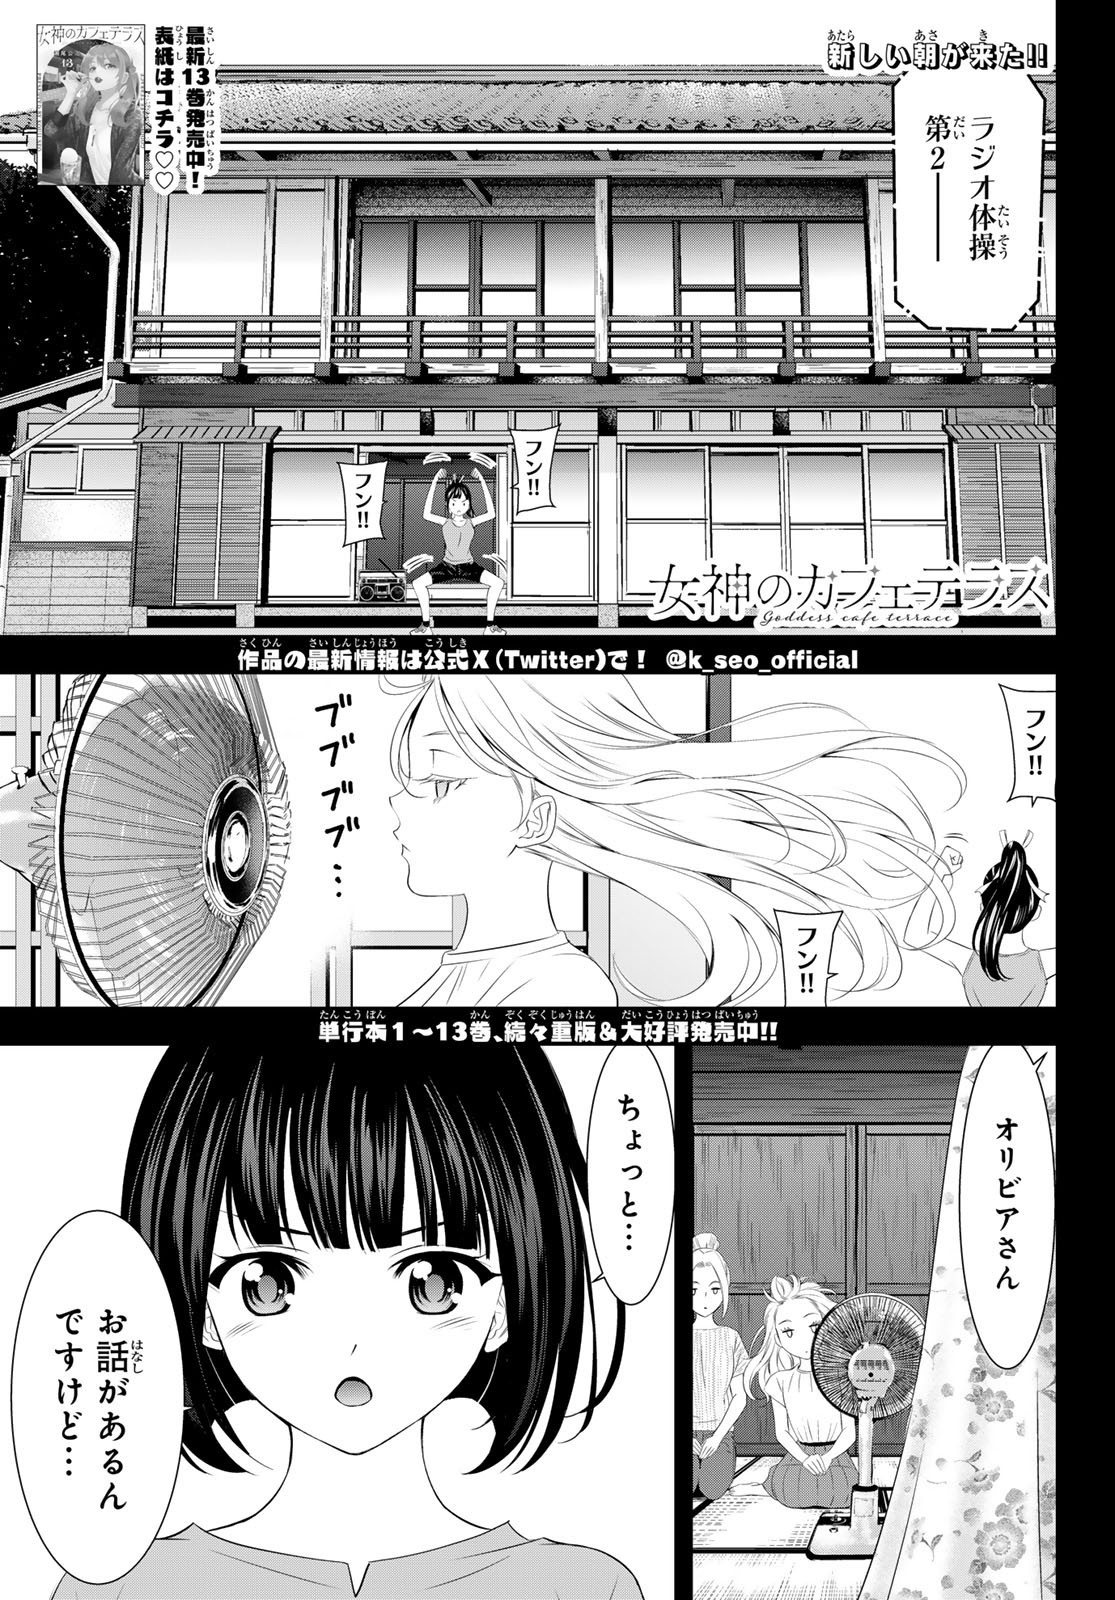 Goddess-Cafe-Terrace - Chapter 139 - Page 1